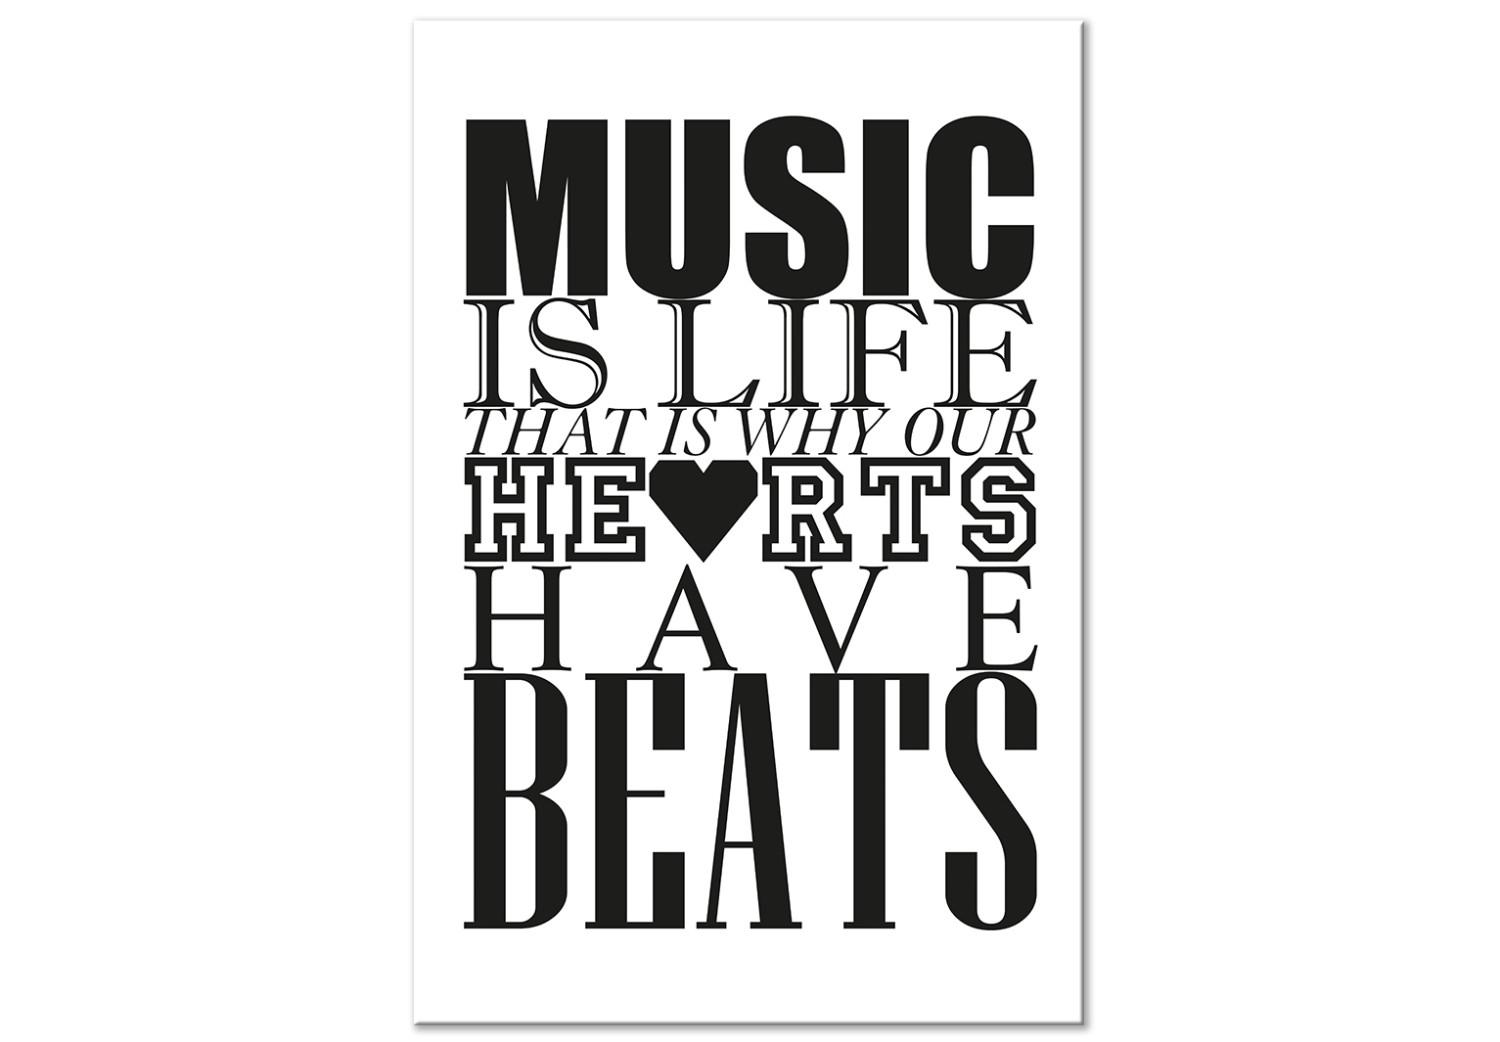 Cuadro Music Is lLfe That Is Why Our Hearts Have Beats